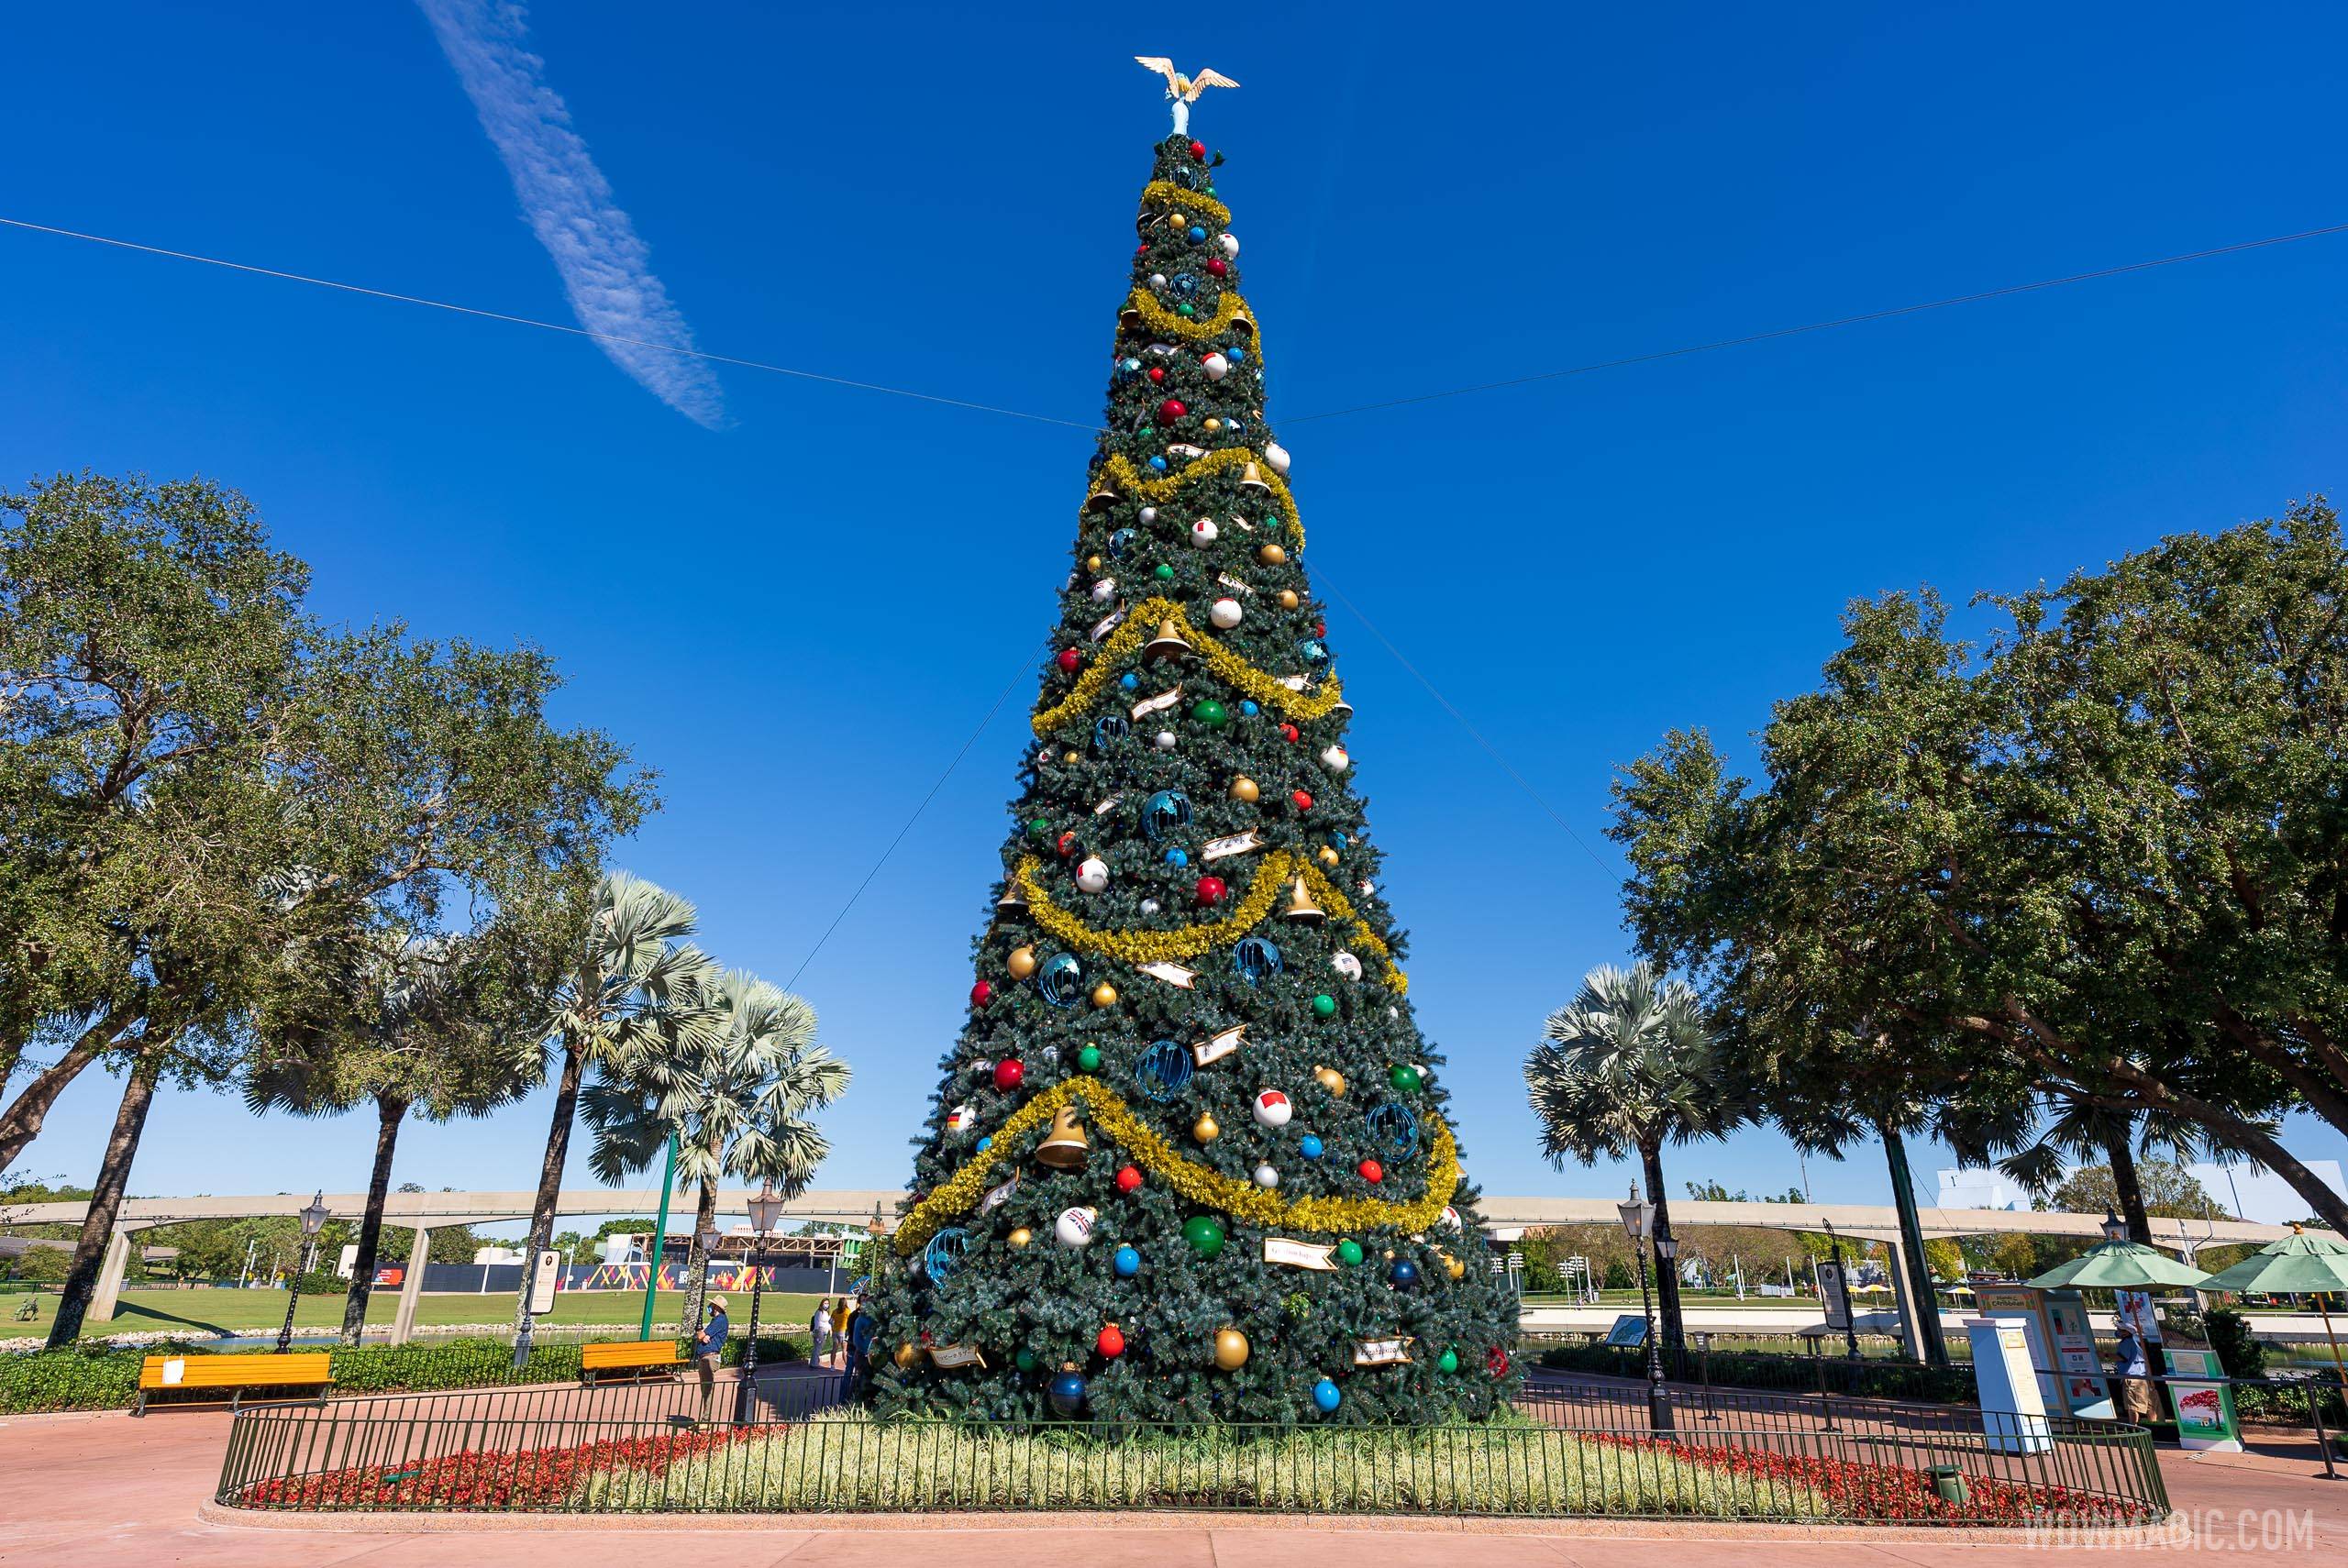 PHOTOS - Holiday decor now on display at EPCOT